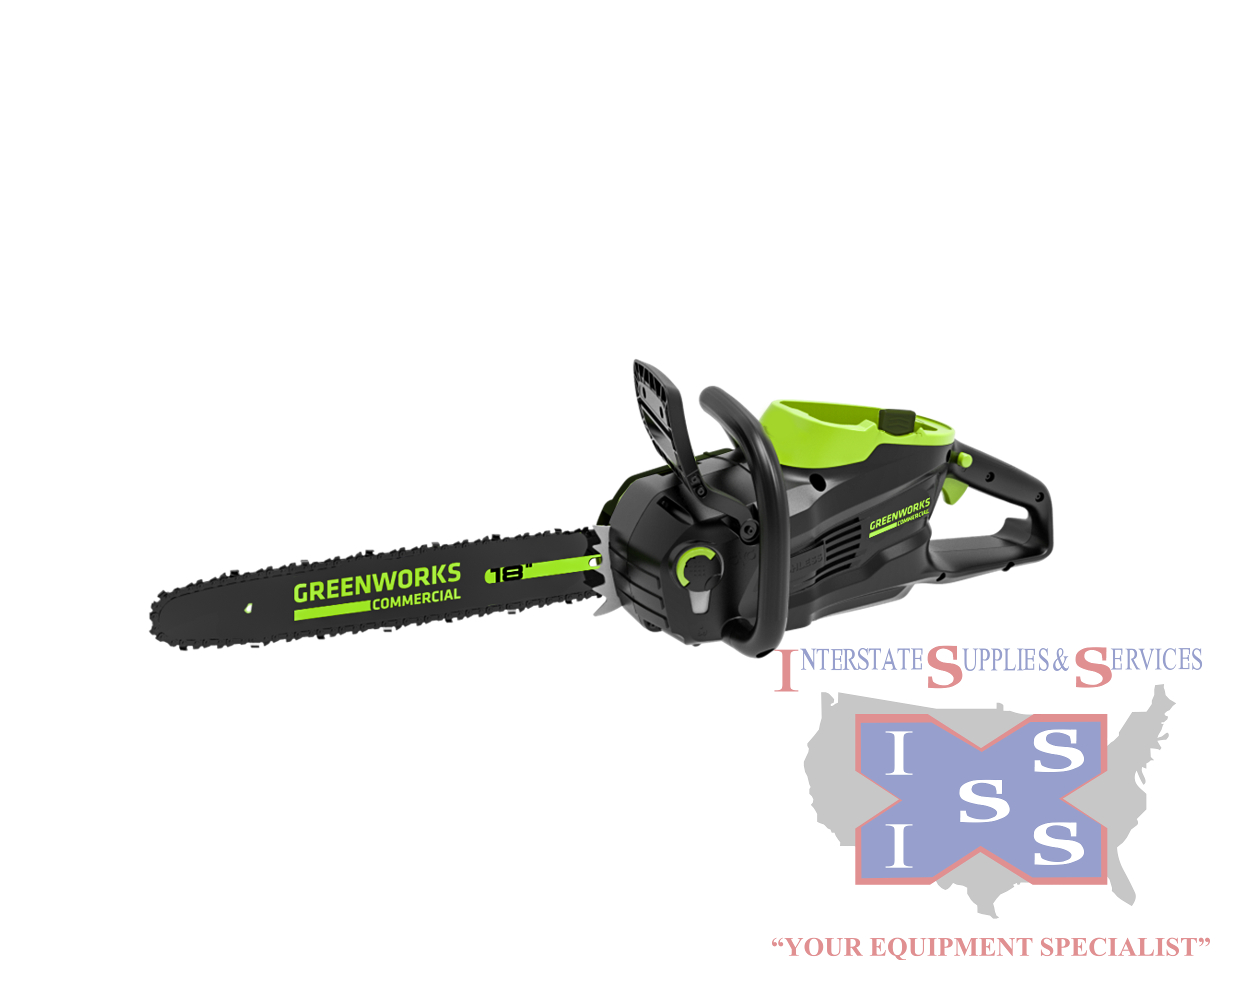 82CS24 82 Volt 16" 2.4kW Chainsaw (Tool Only)